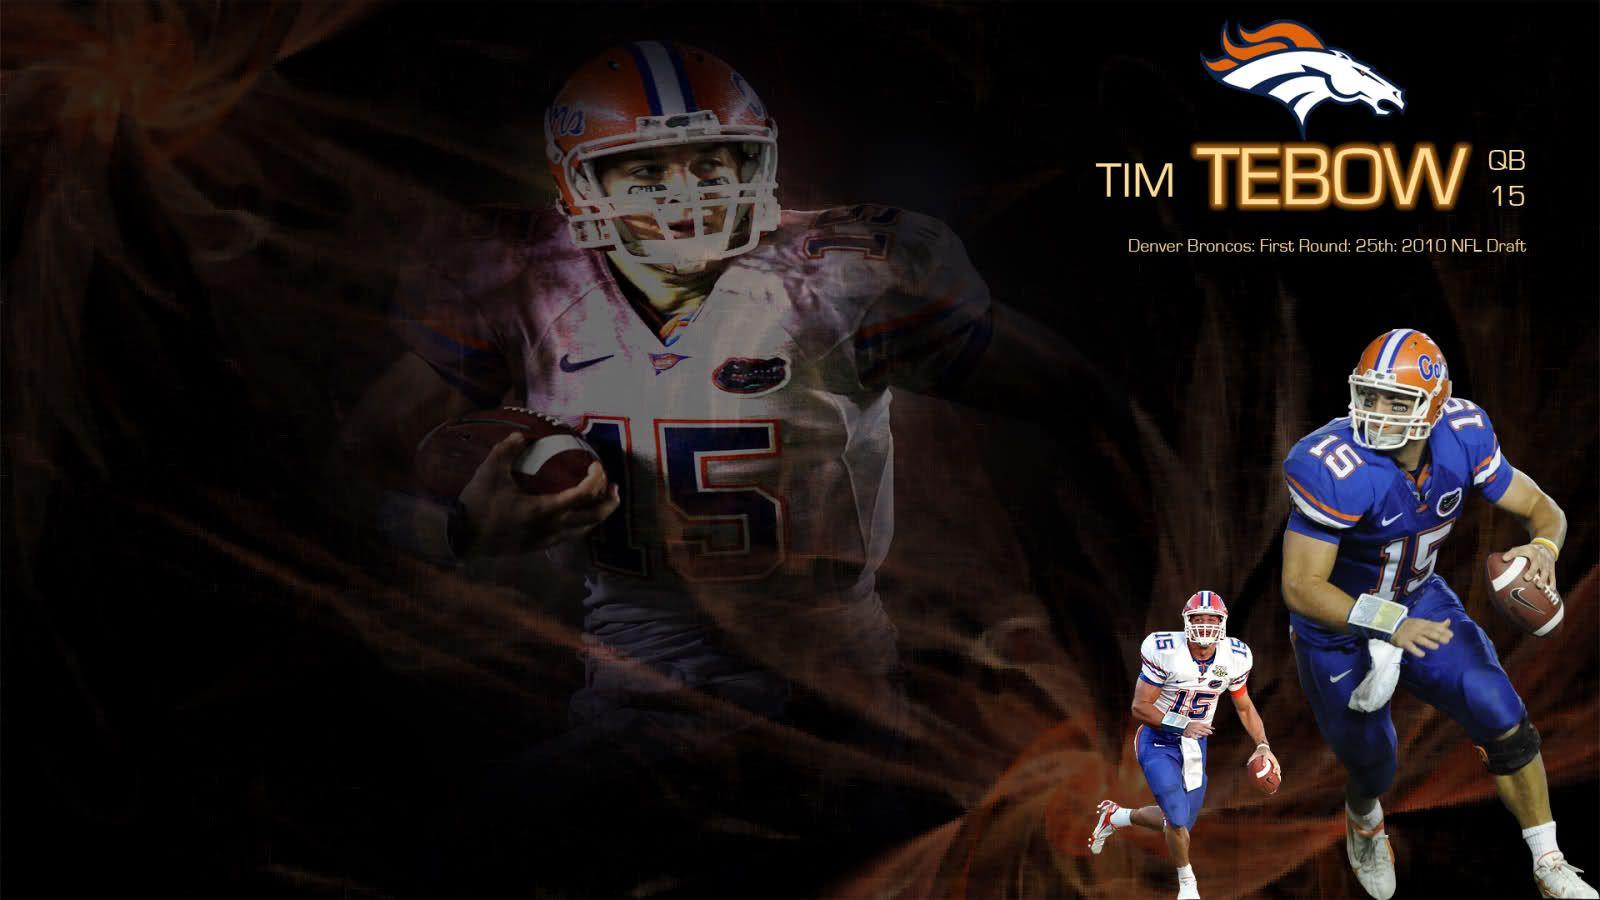 Tim Tebow: Denver Broncos First Round Pick Wallpapers.